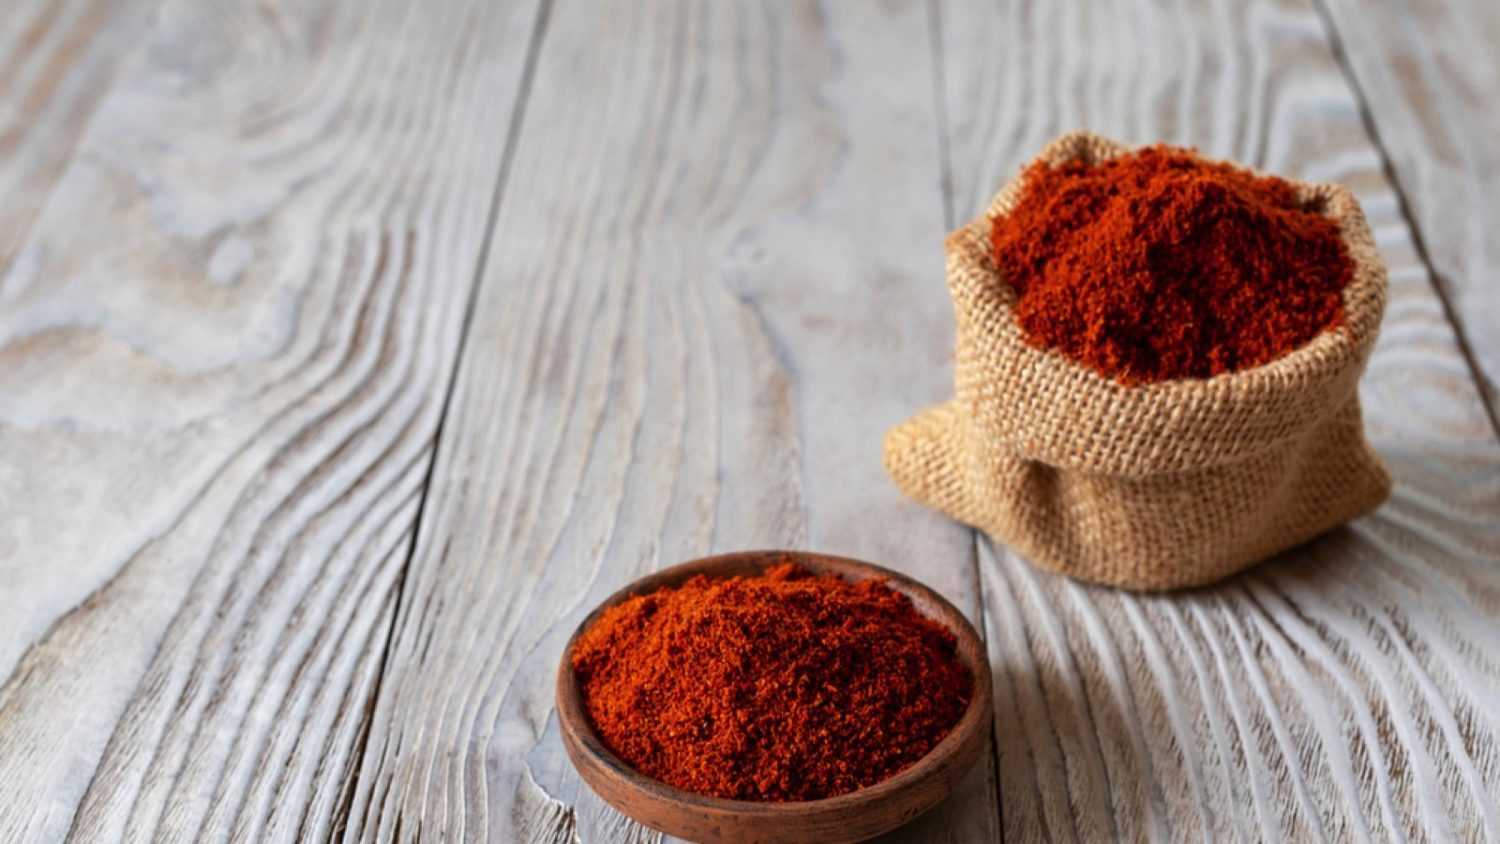 Berbere is the main part in the cuisines of Ethiopia and Eritrea. A mixture of spices, usually including red pepper, ginger, cloves, coriander, allspice. Wooden background.